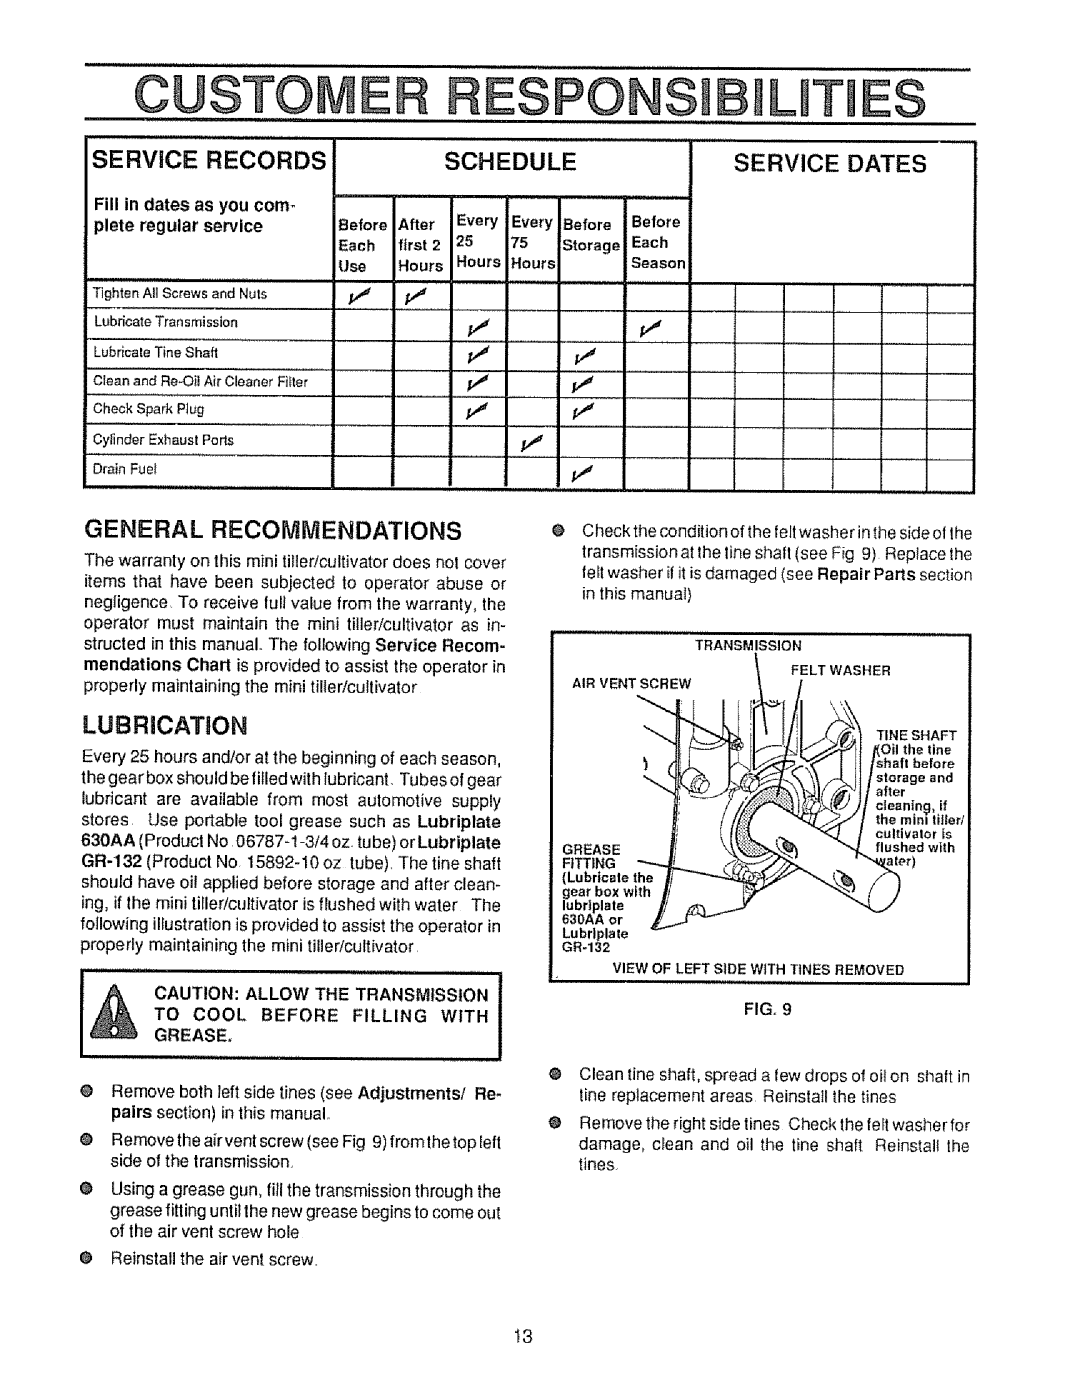 Craftsman 536.7975 manual Esponsi, Ilities, Schedule, Service Dates, General Recommendations, LUBRiCATiON 